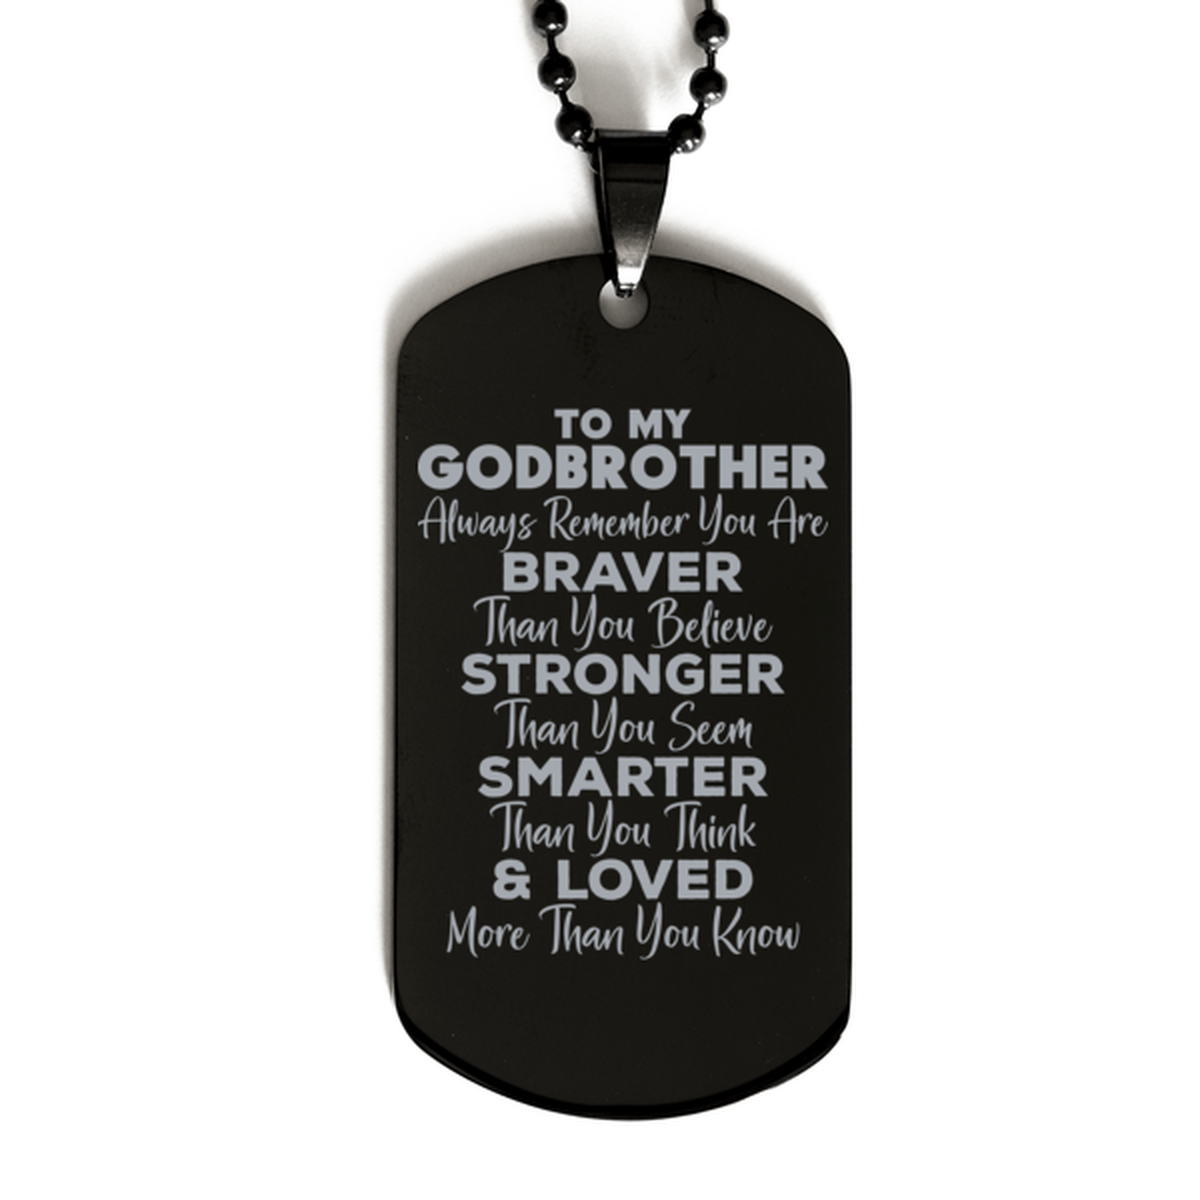 Motivational Godbrother Black Dog Tag Necklace, Godbrother Always Remember You Are Braver Than You Believe, Best Birthday Gifts for Godbrother